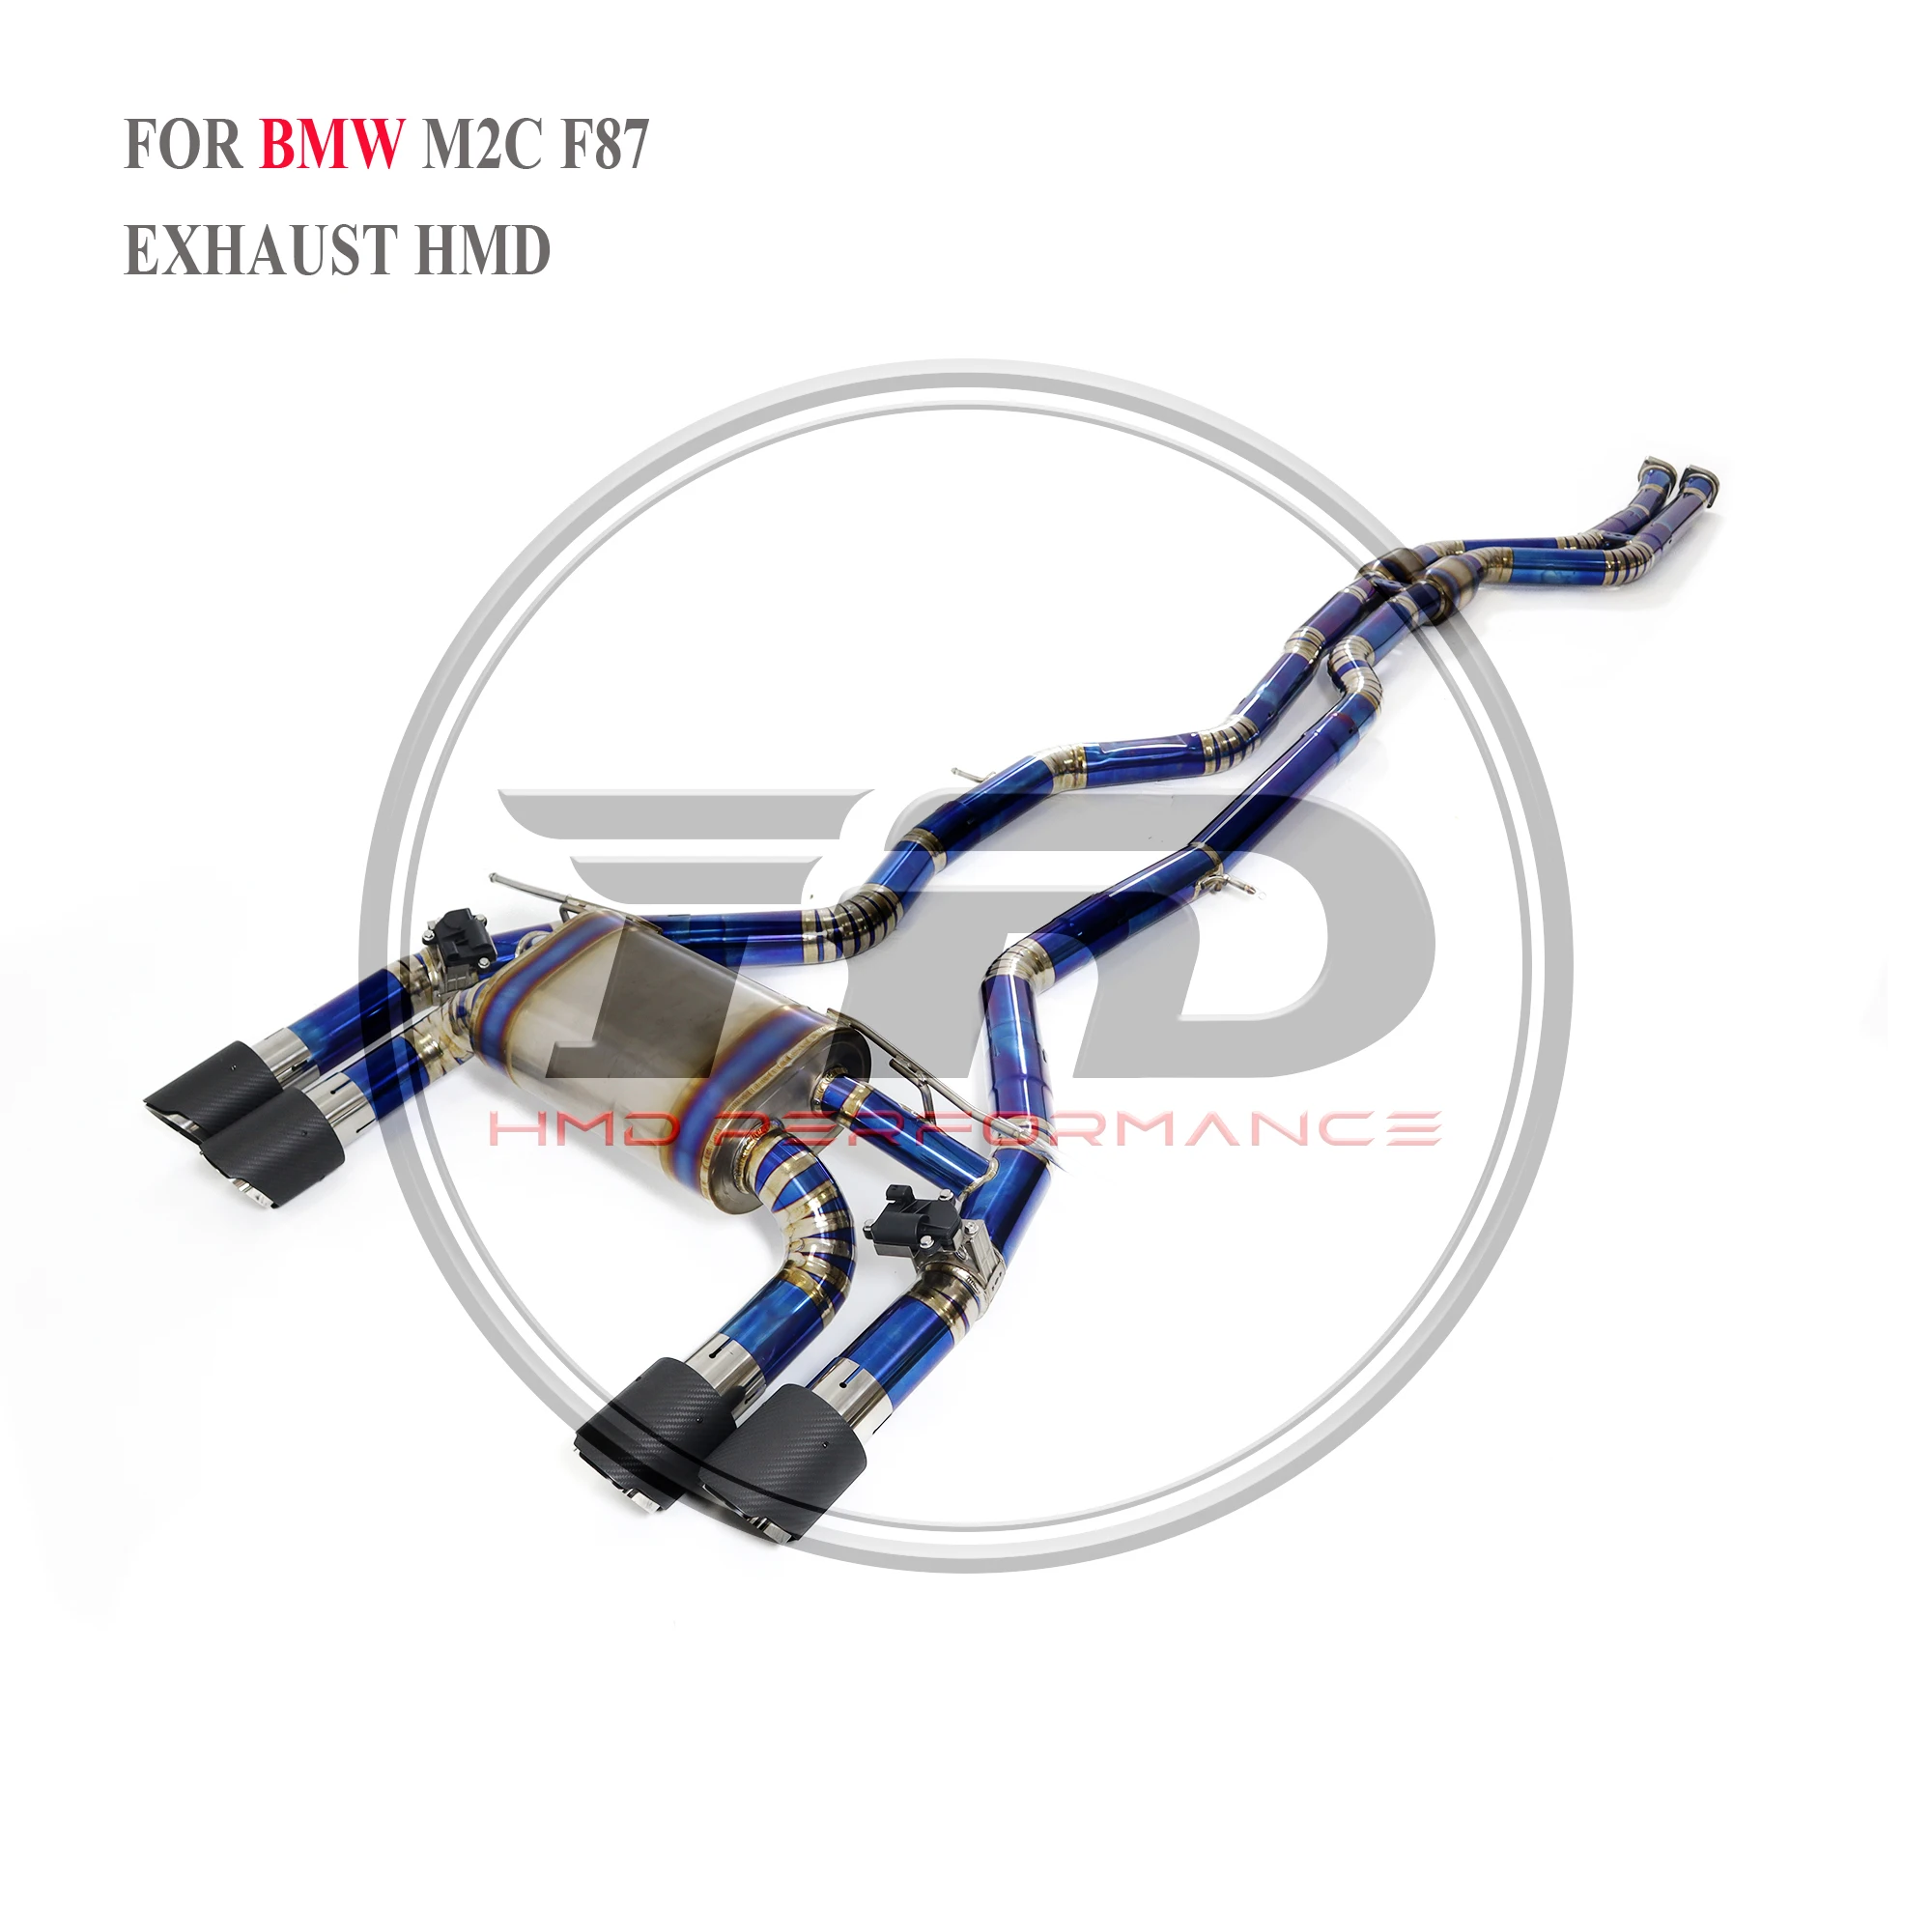 

HMD Titanium Exhaust System Performance Catback for BMW M2C M2 Competition F87 3.0T S55 Engine Muffler With Valve